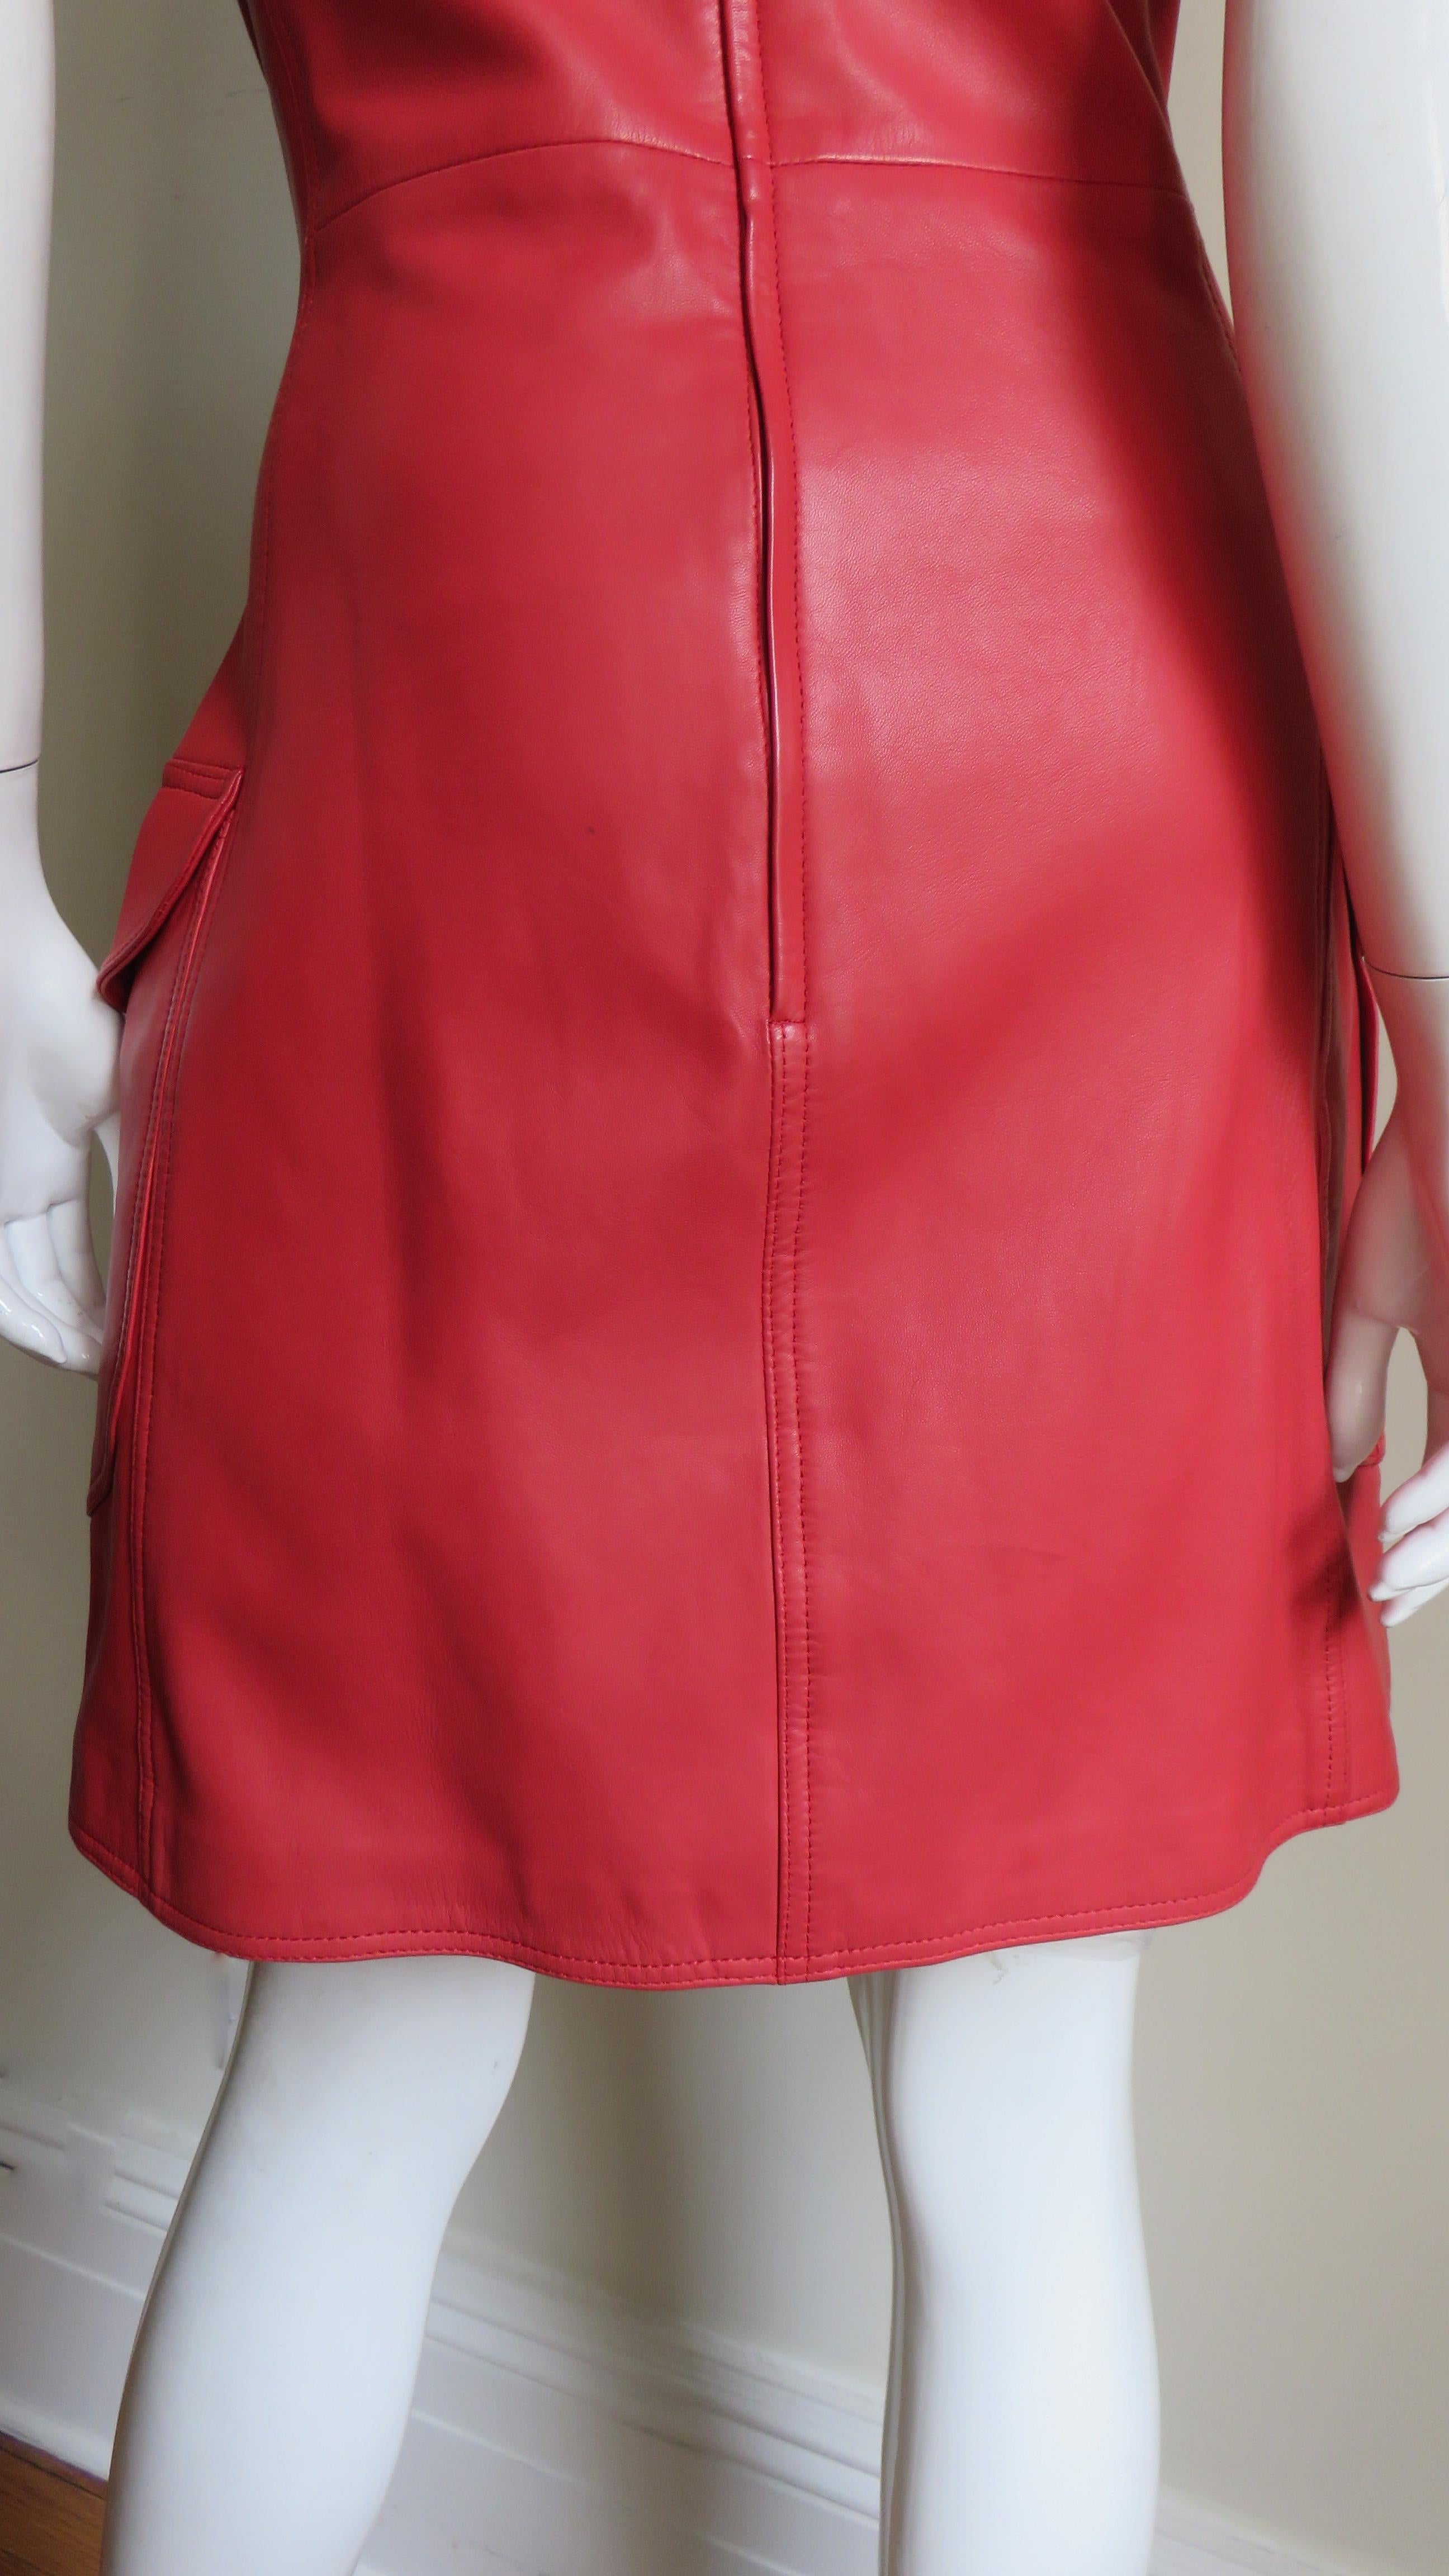 Gianni Versace New F/W 1996 Red Leather Dress For Sale 5